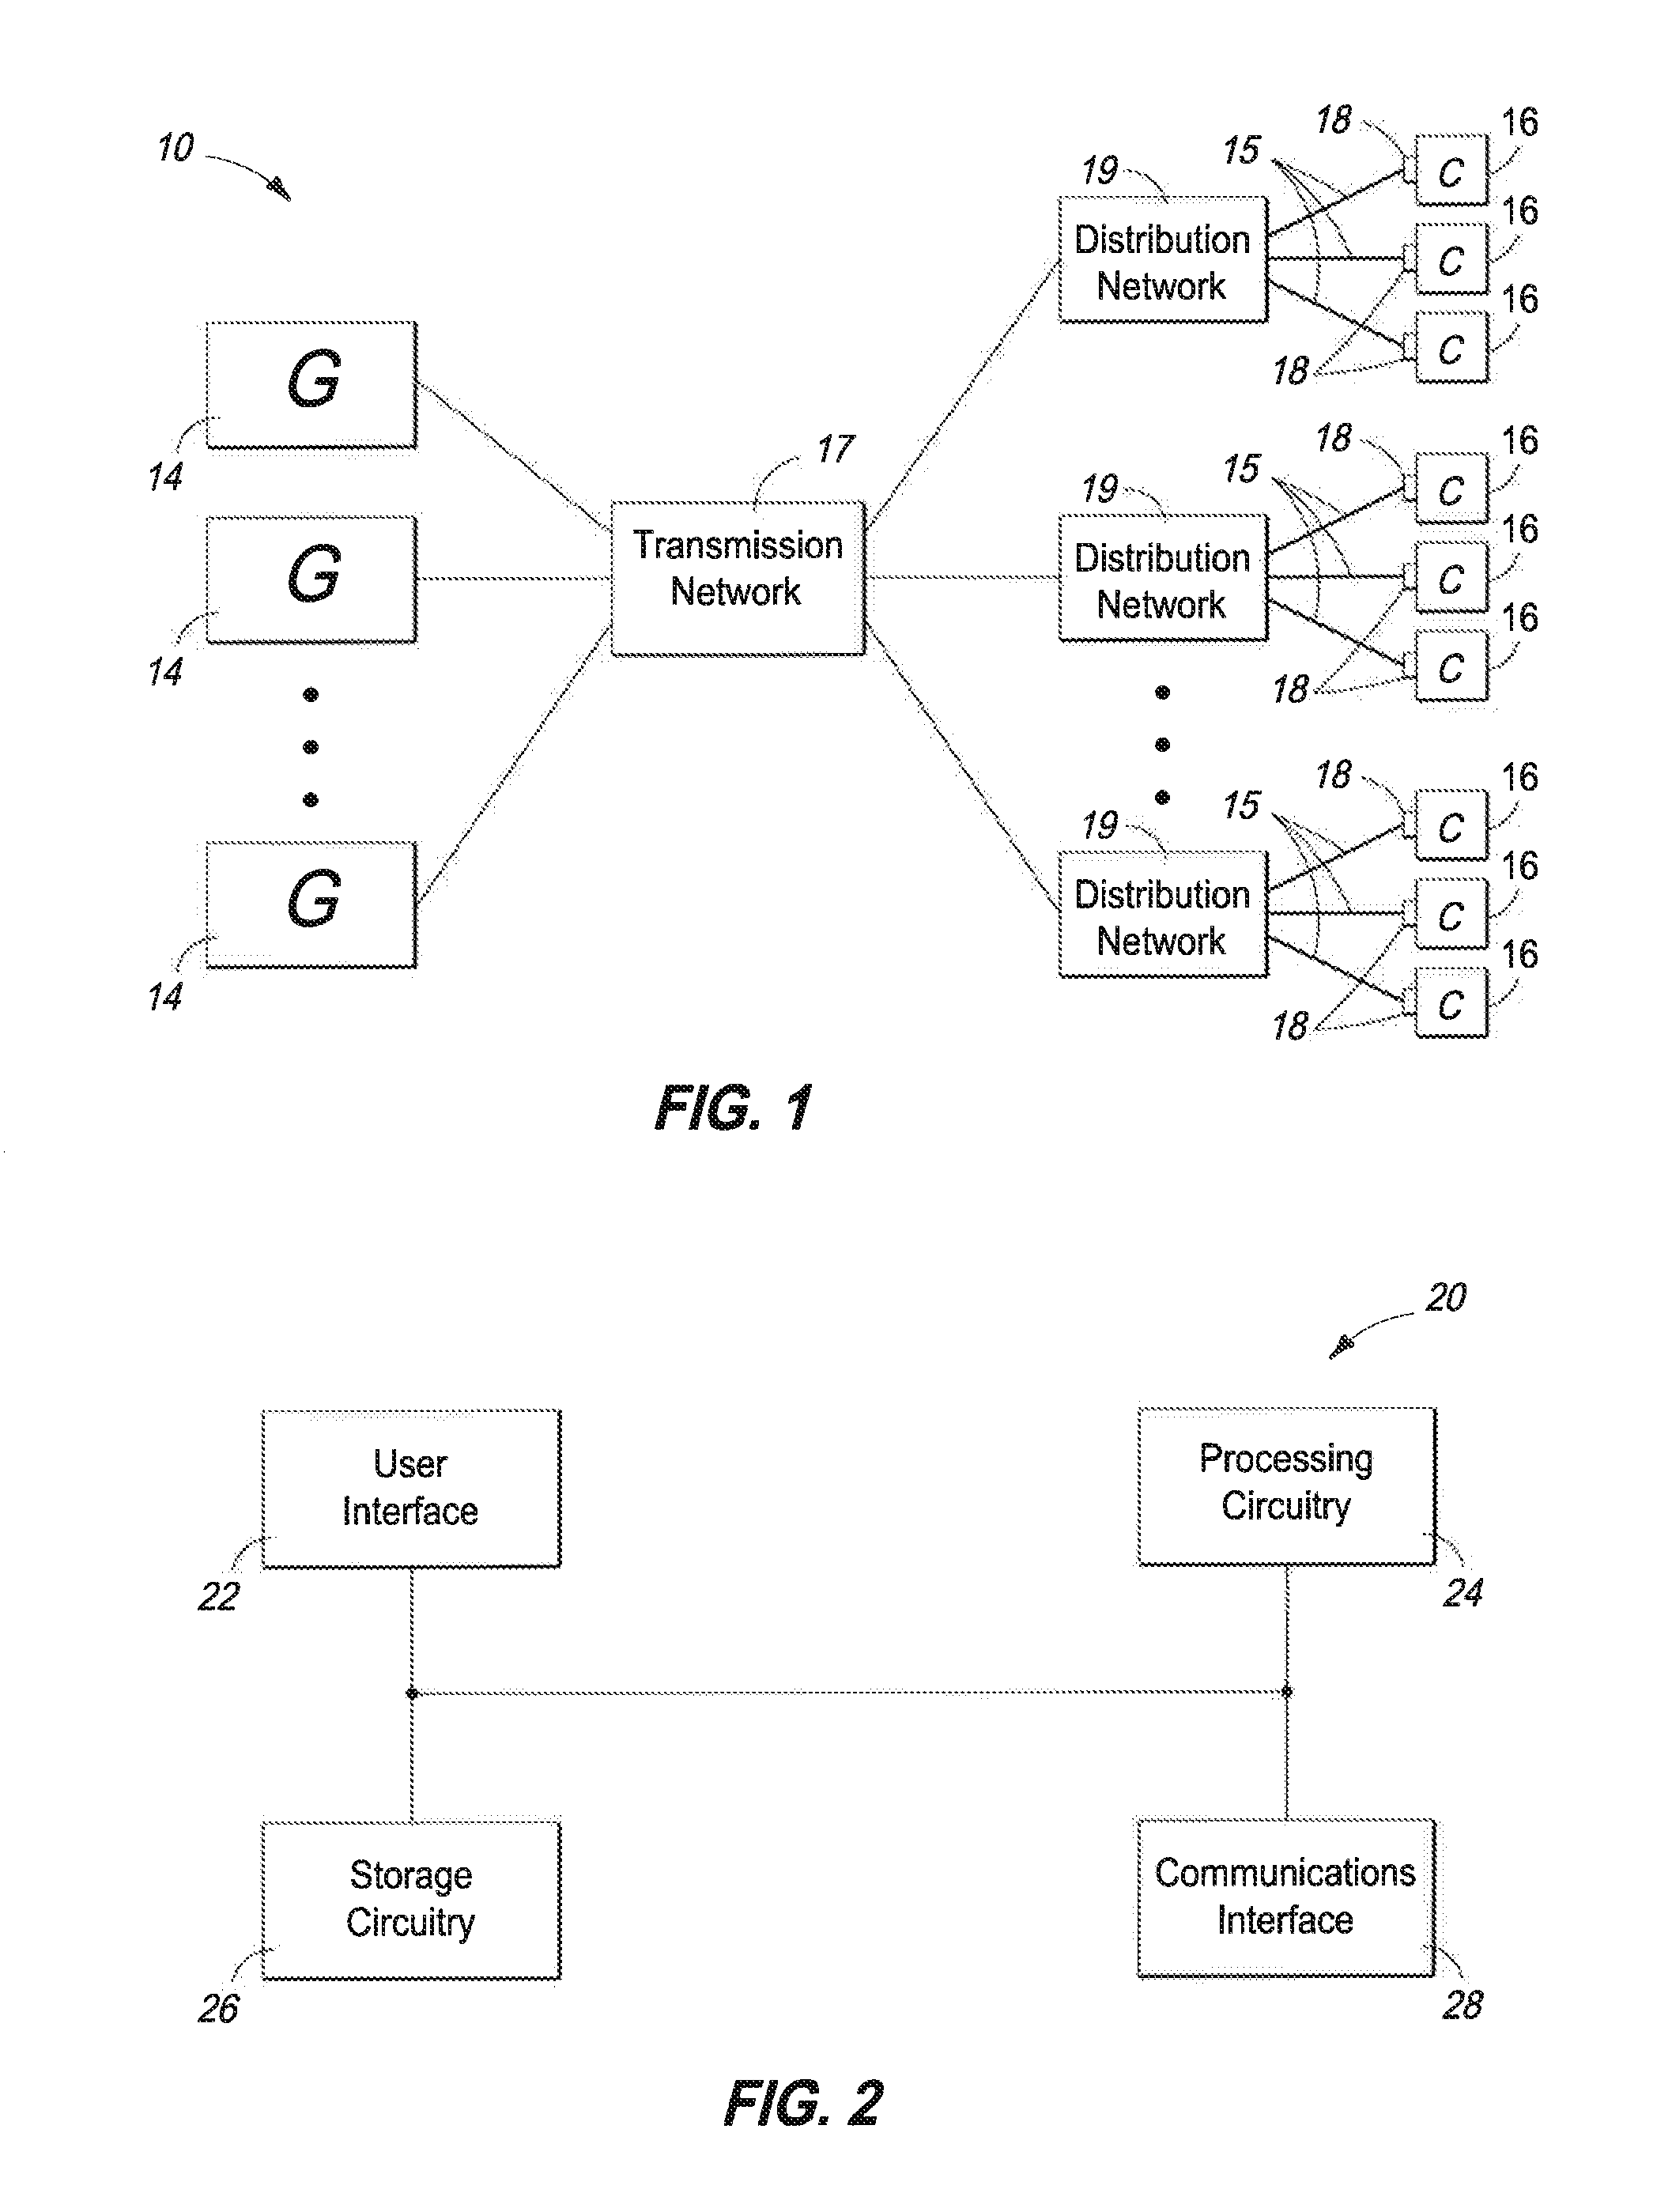 Electrical Power Grid Monitoring Apparatus, Articles of Manufacture, and Methods of Monitoring Equipment of an Electrical Power Grid